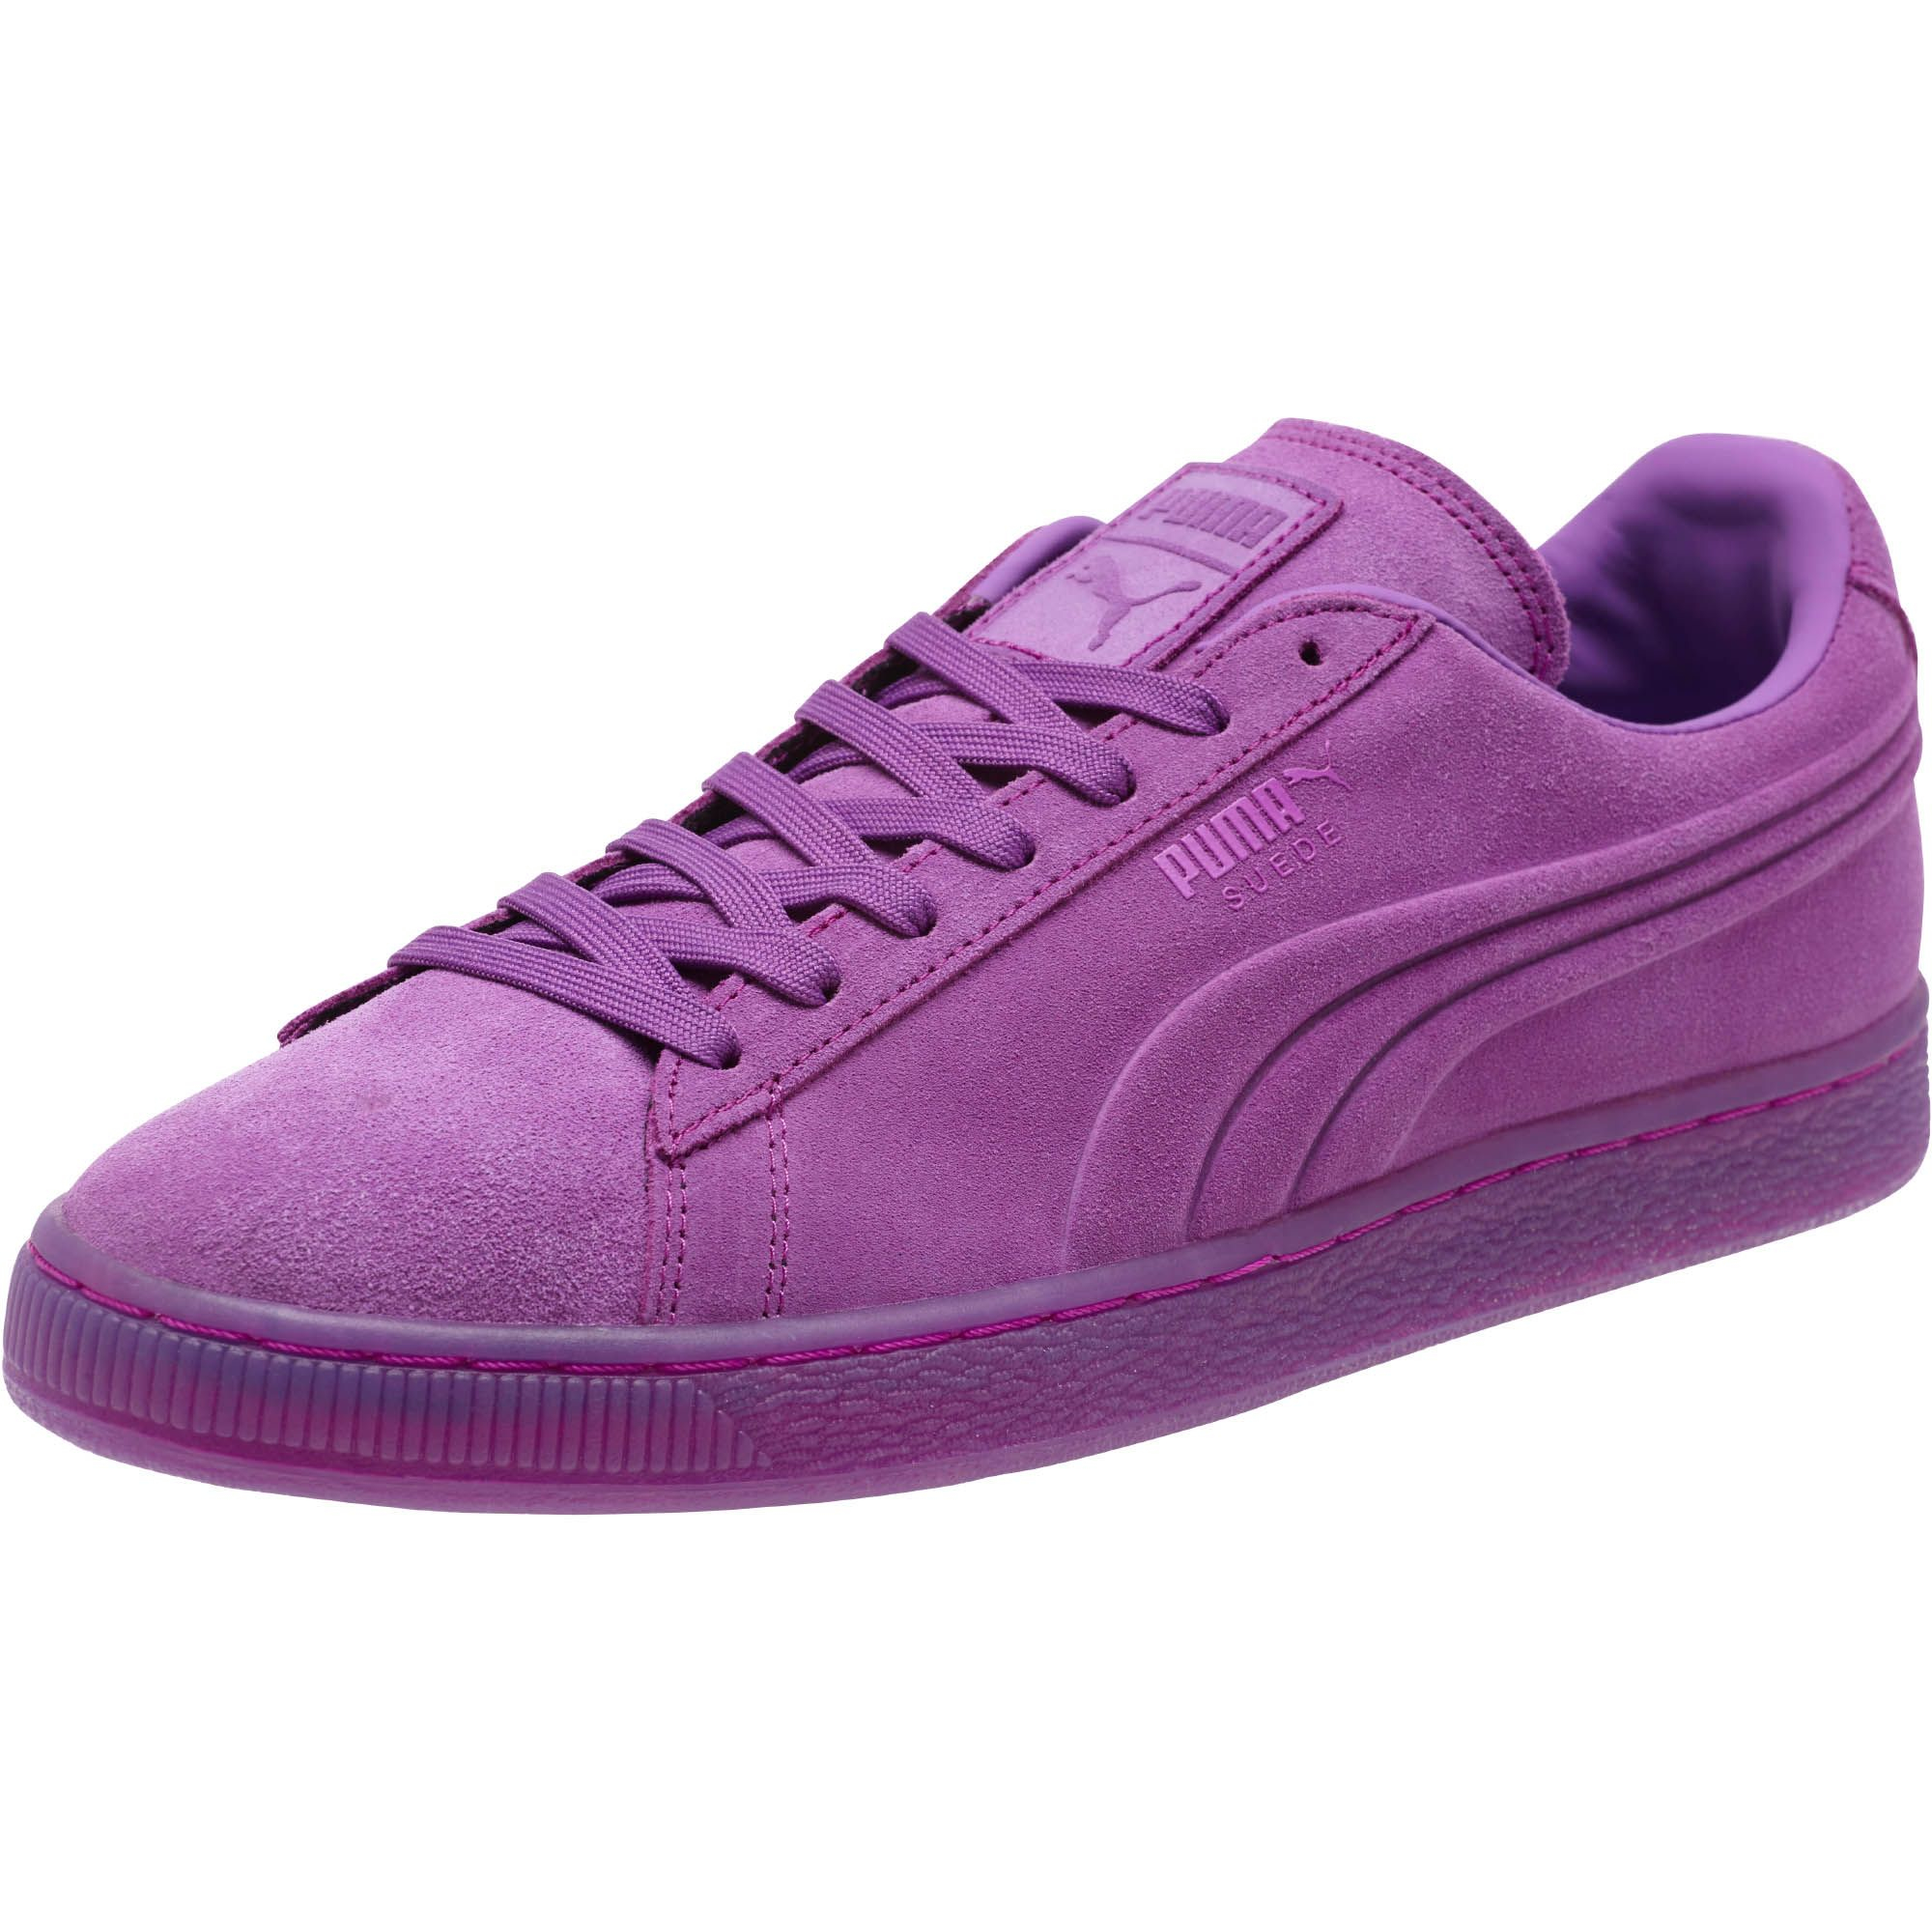 puma suede emboss iced fluo